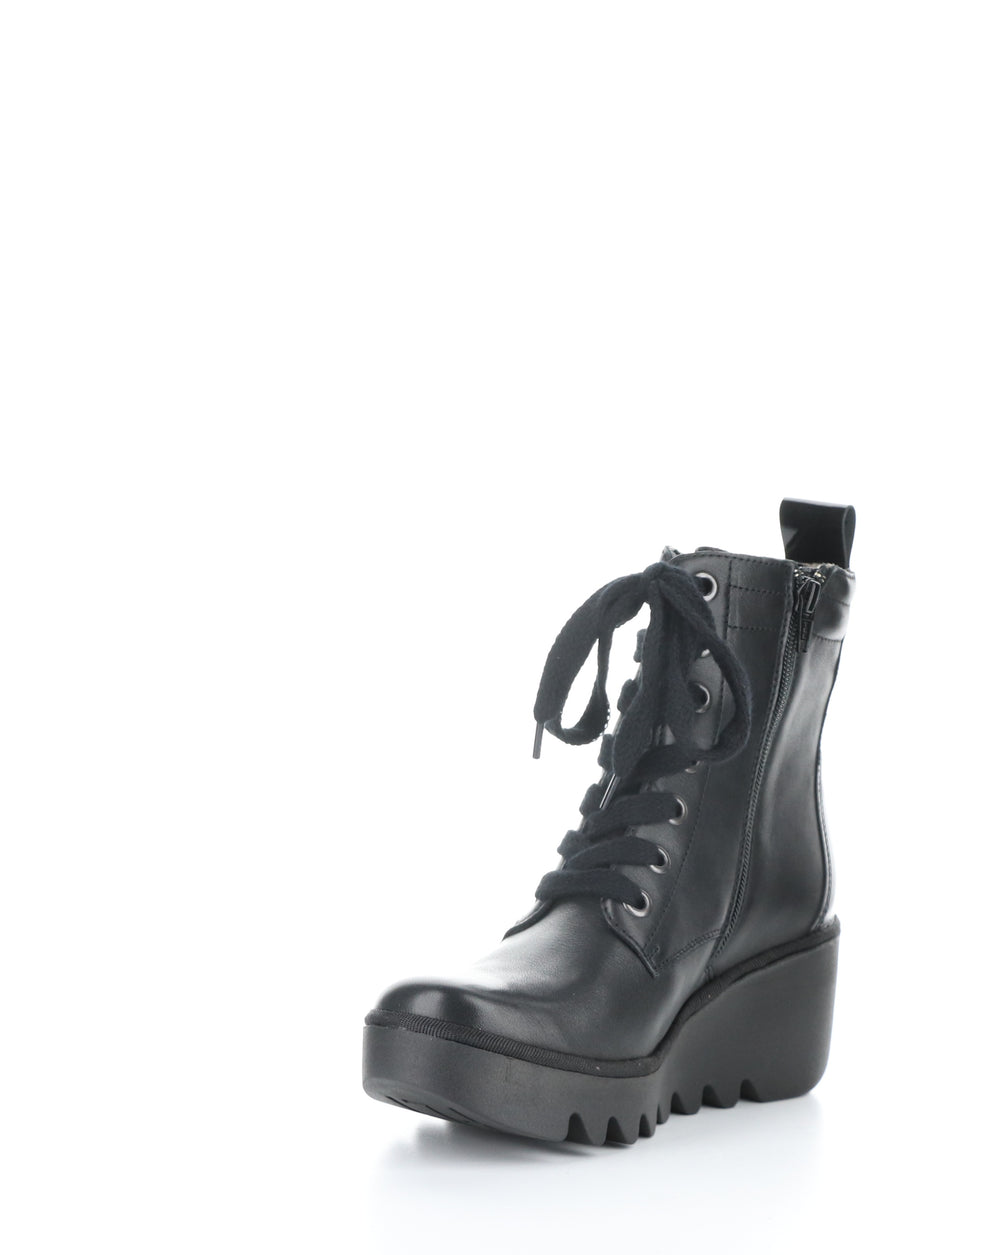 BIAZ329FLY 011 BLACK Lace-up Boots